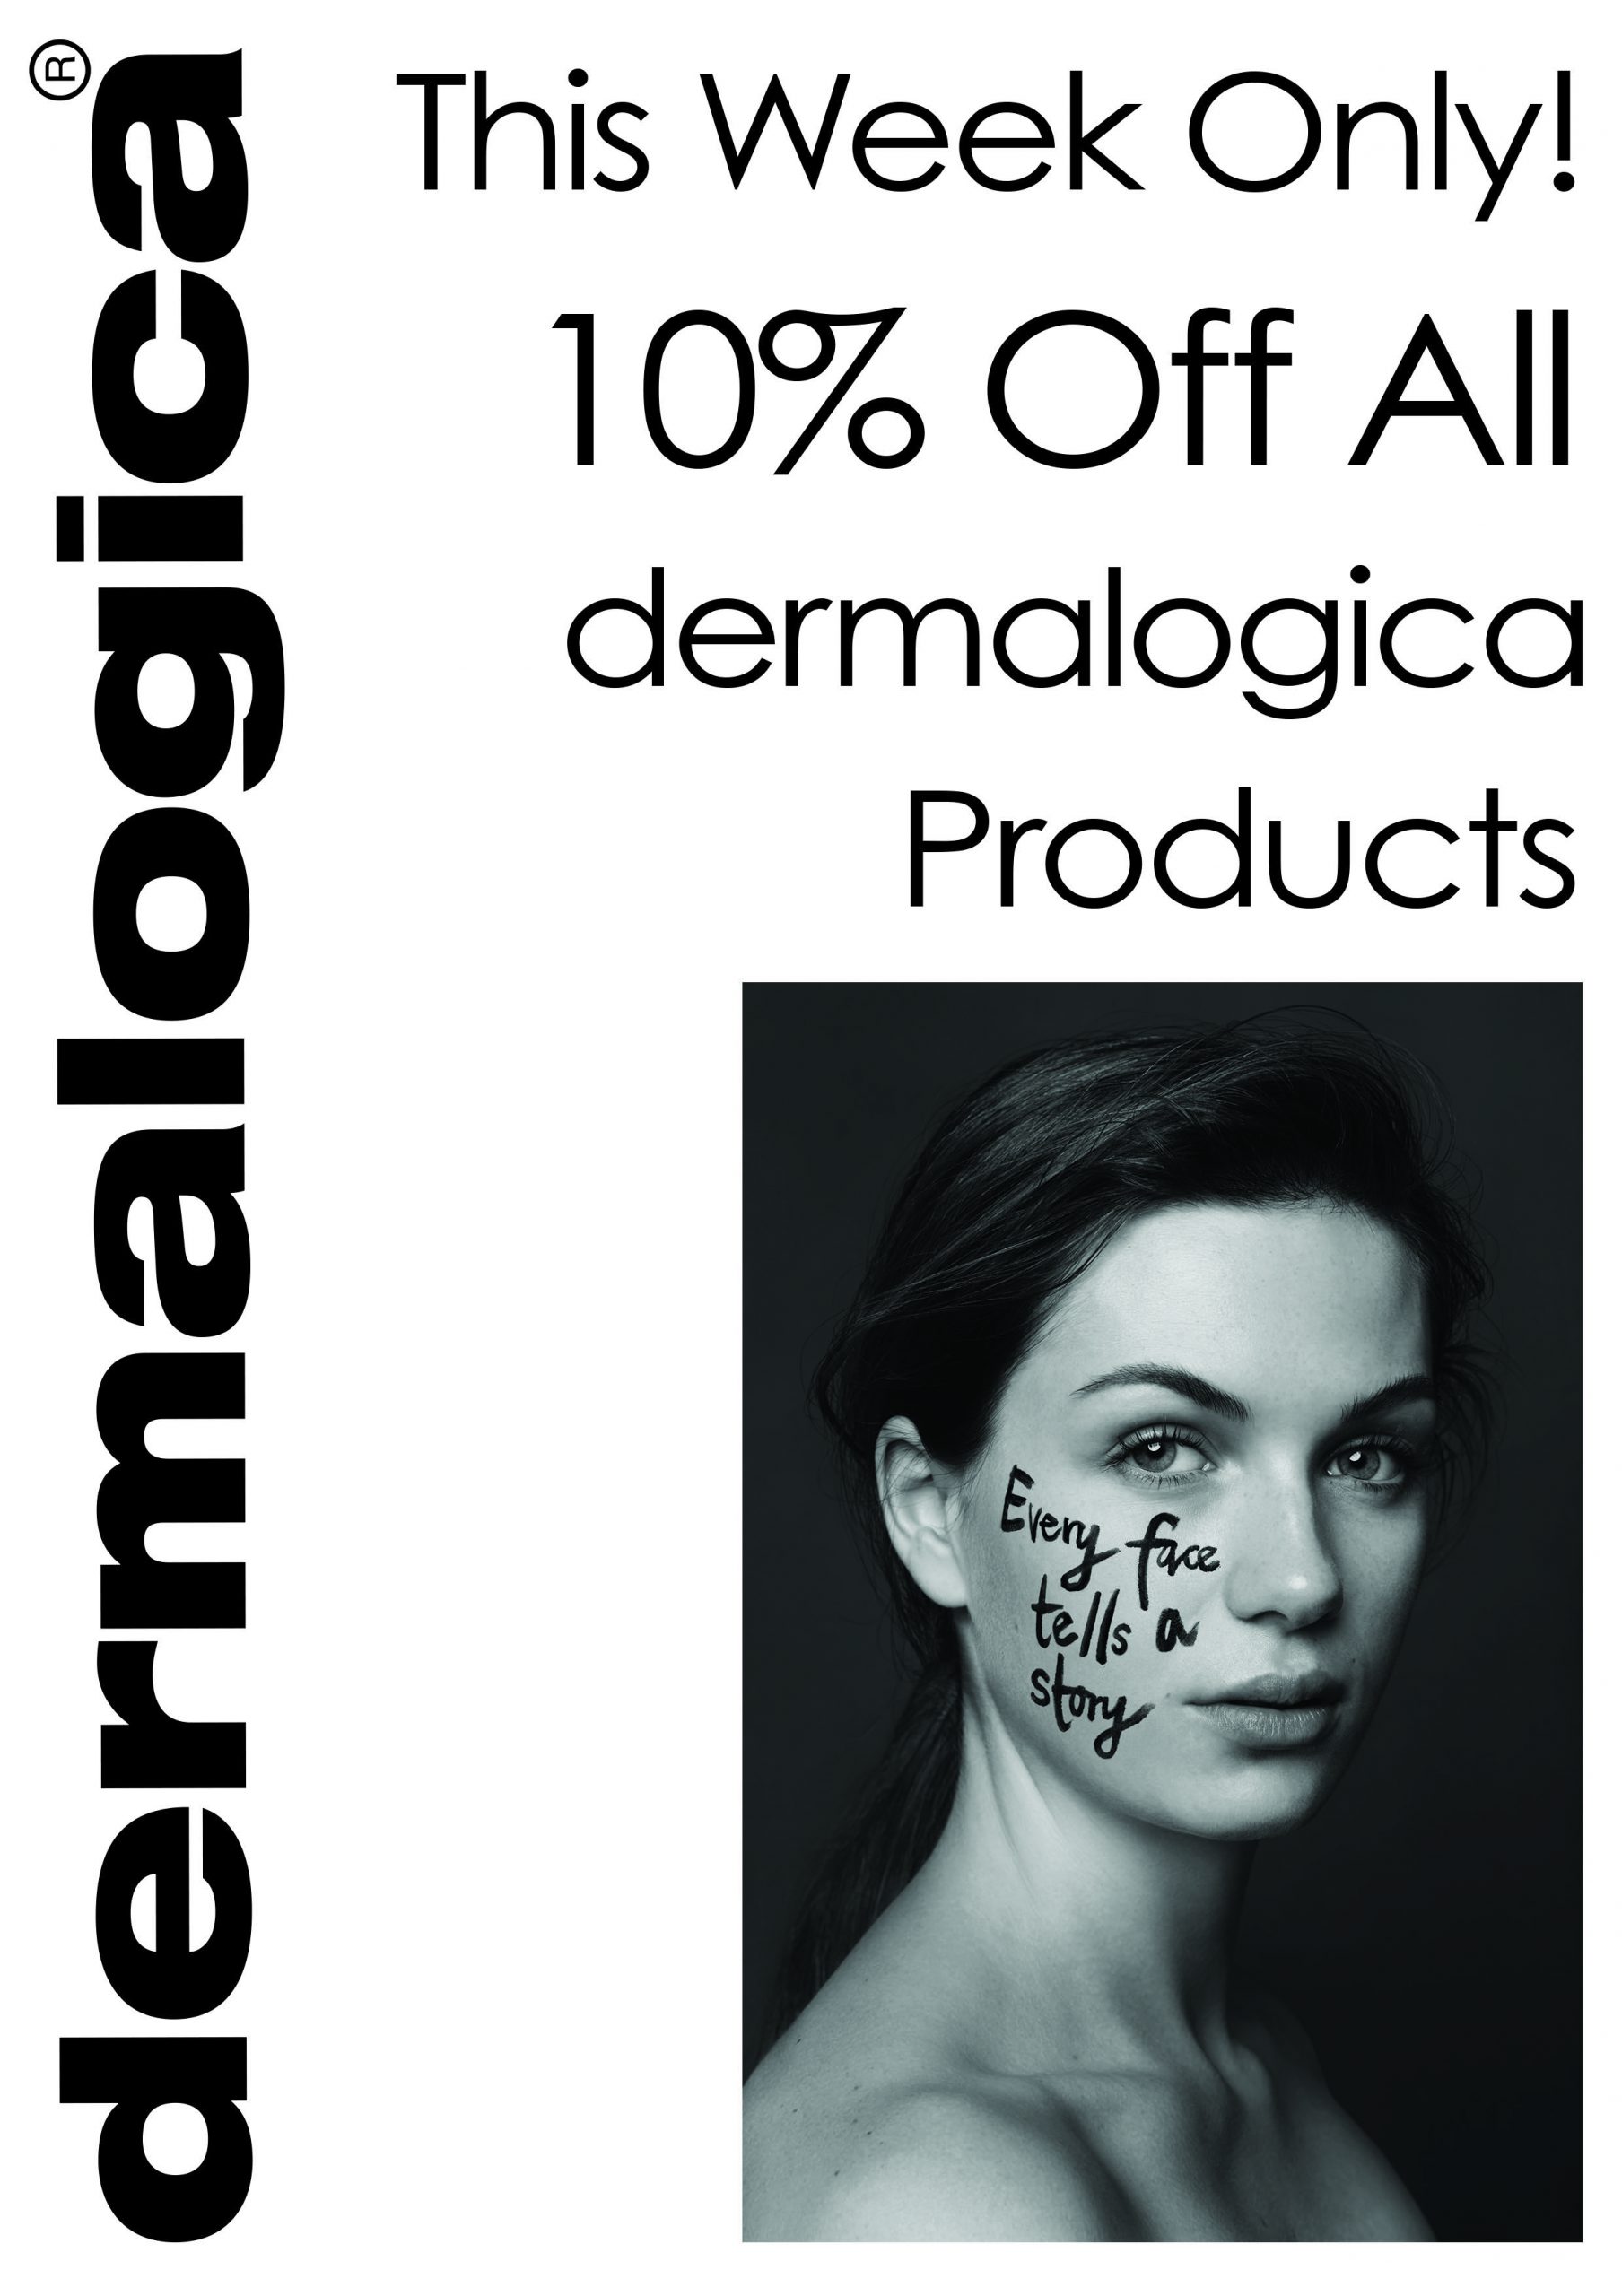 10% OFF DERMALOGICA FOR ONE WEEK ONLY